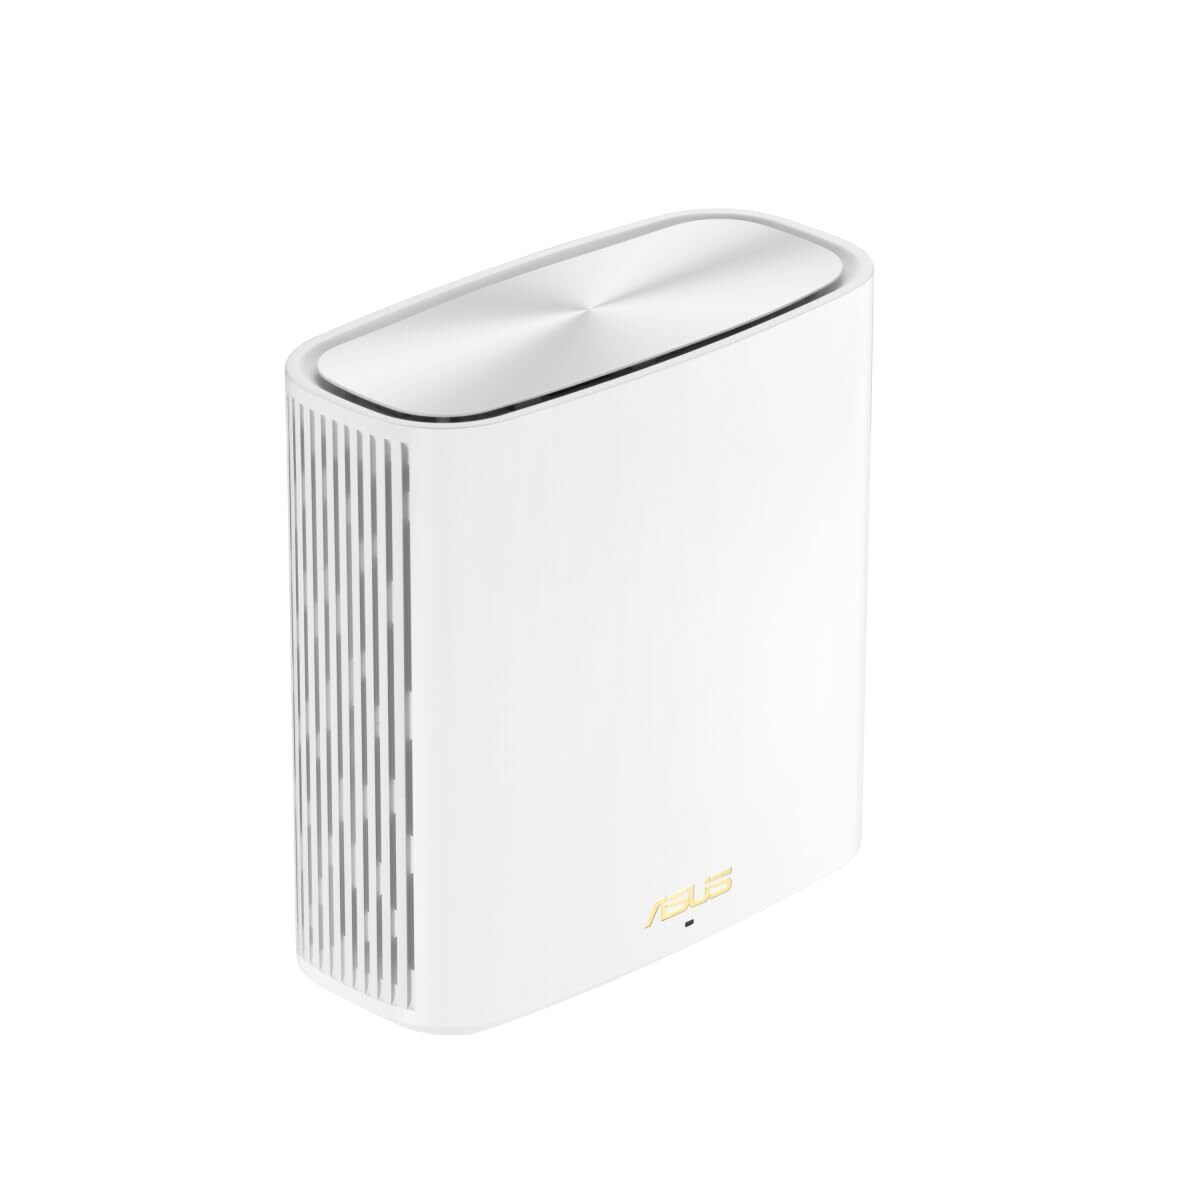 ASUS ZenWiFi XD6S WiFi 6 Mesh System - AX5400-1 Pack - White